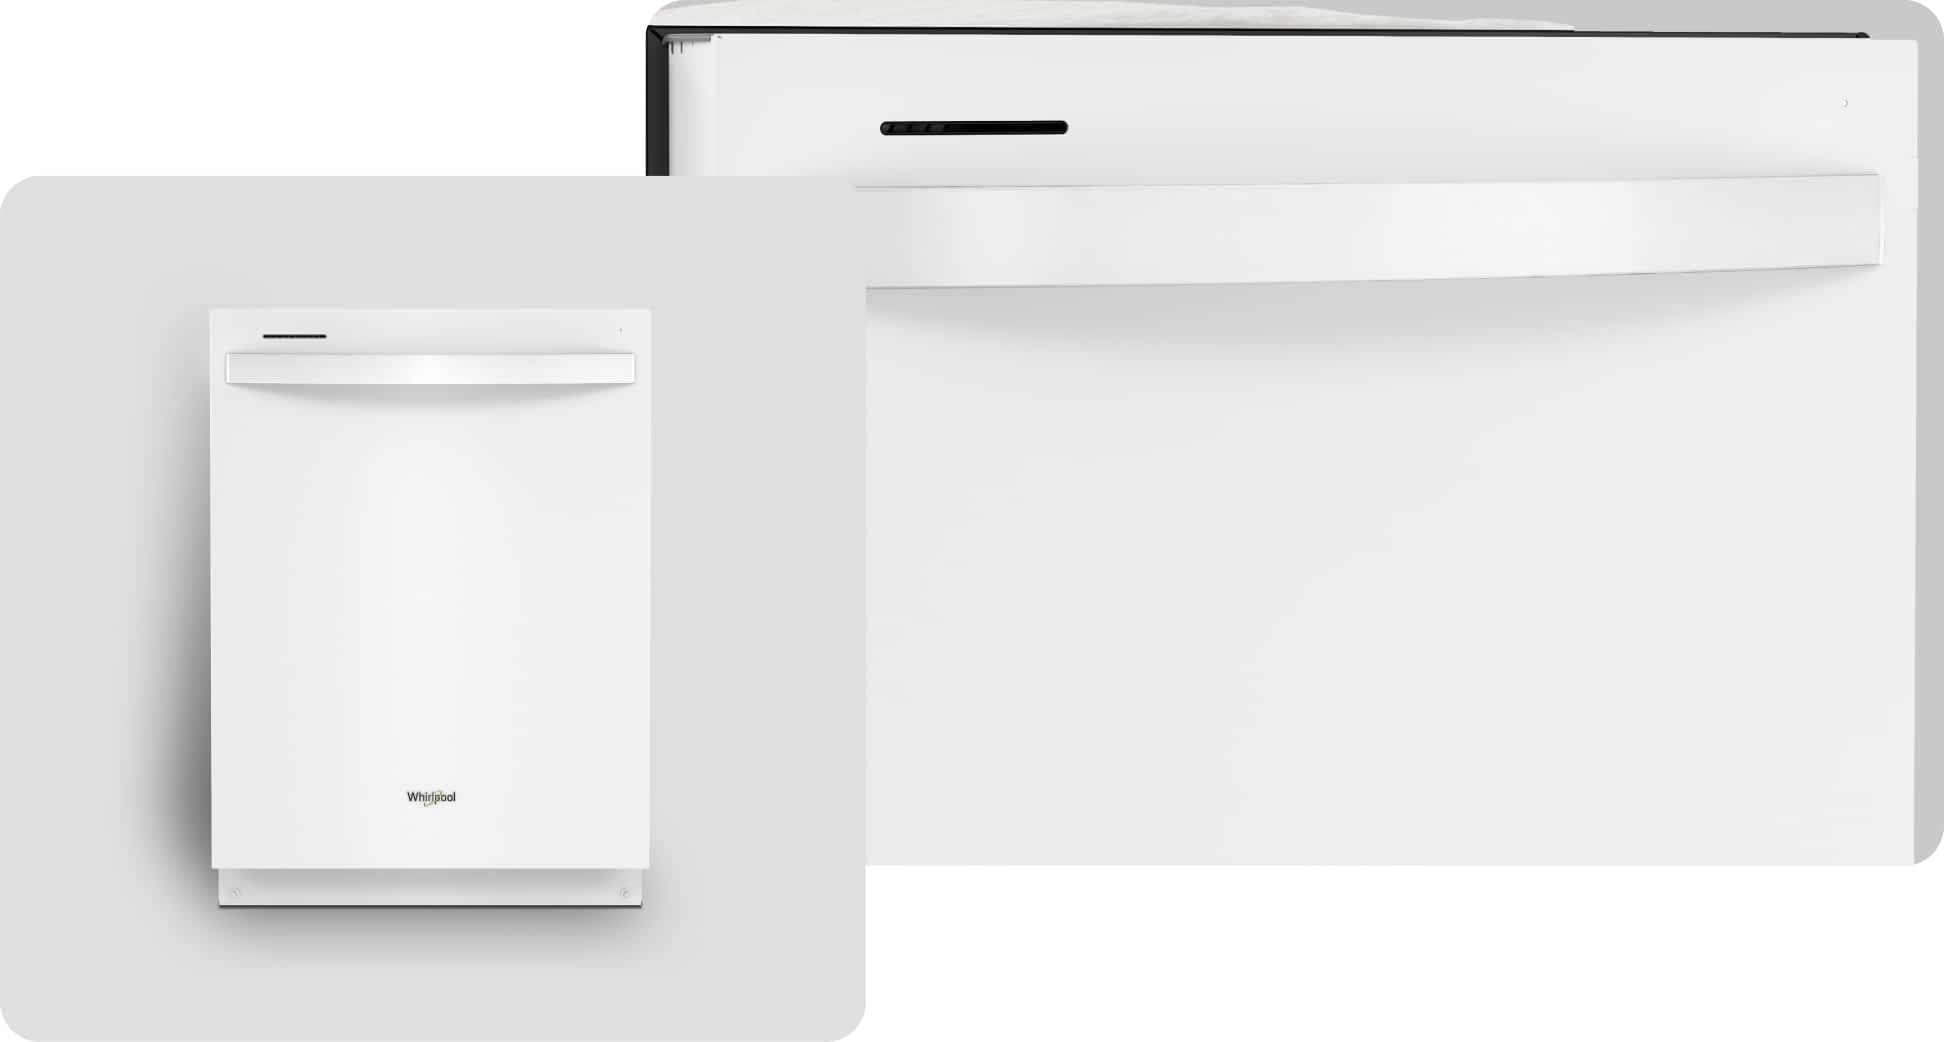 A Whirlpool® Dishwasher with a White Finish